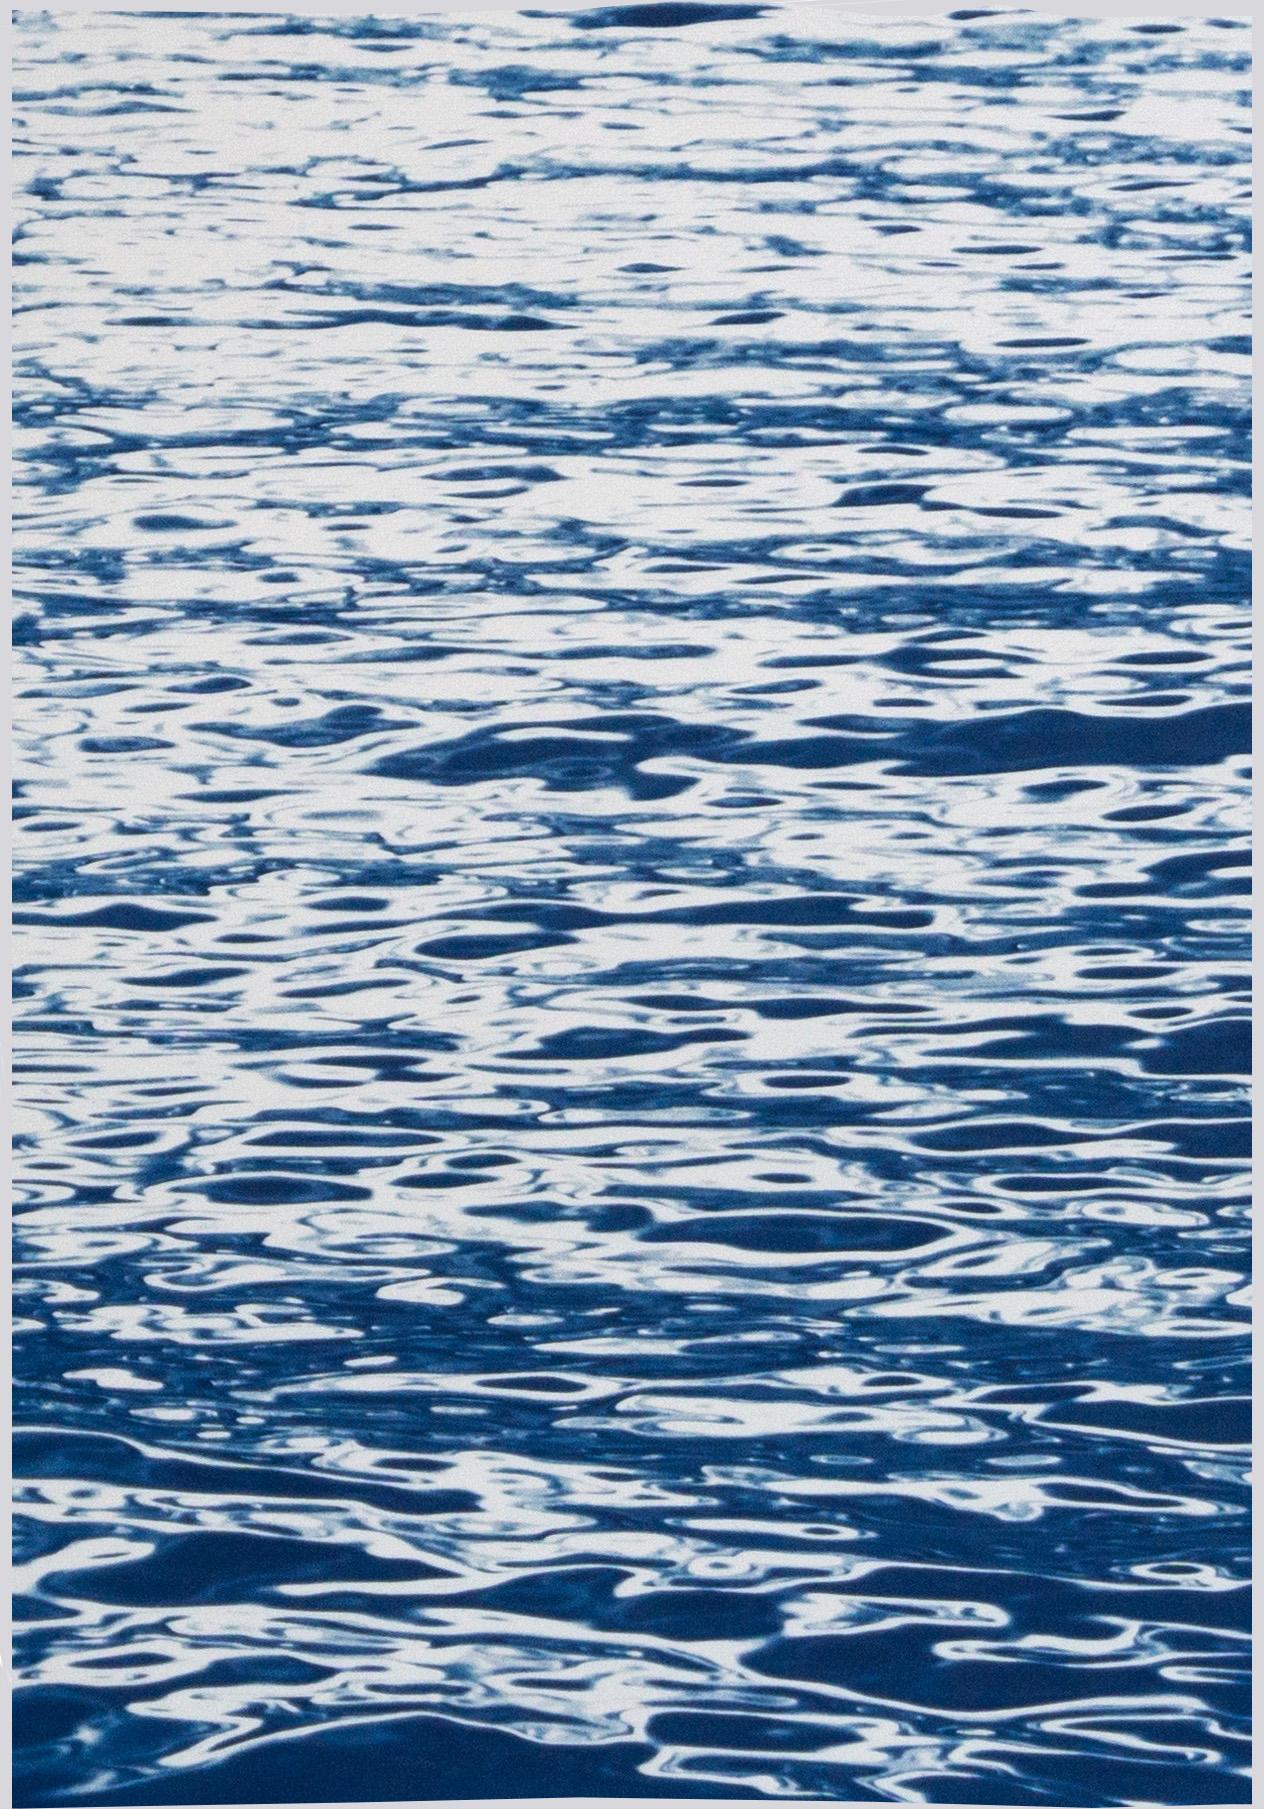 Moonlight Ripples over Lake Como, Nautical Cyanotype Triptych of Moving Water - Blue Landscape Photograph by Kind of Cyan